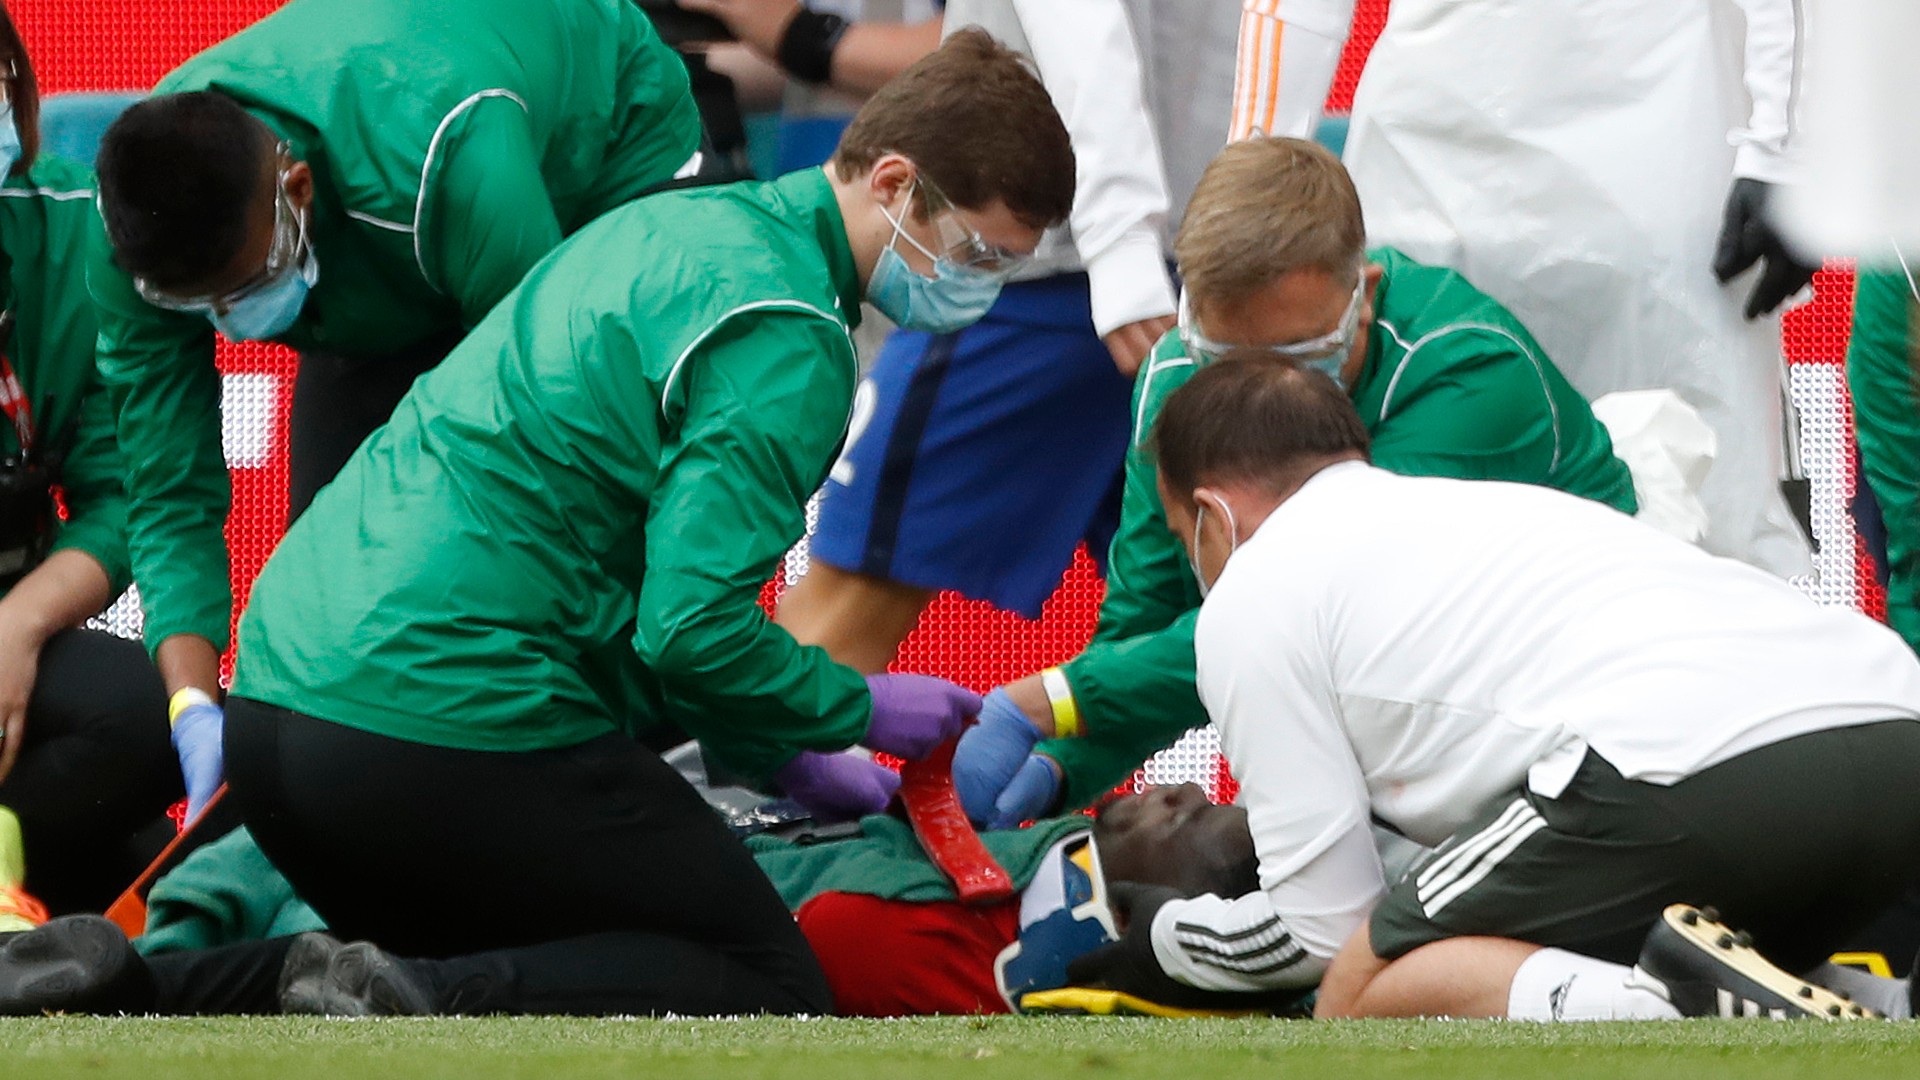 'Just a scare' - Bailly assures Man Utd supporters following head collision at Wembley